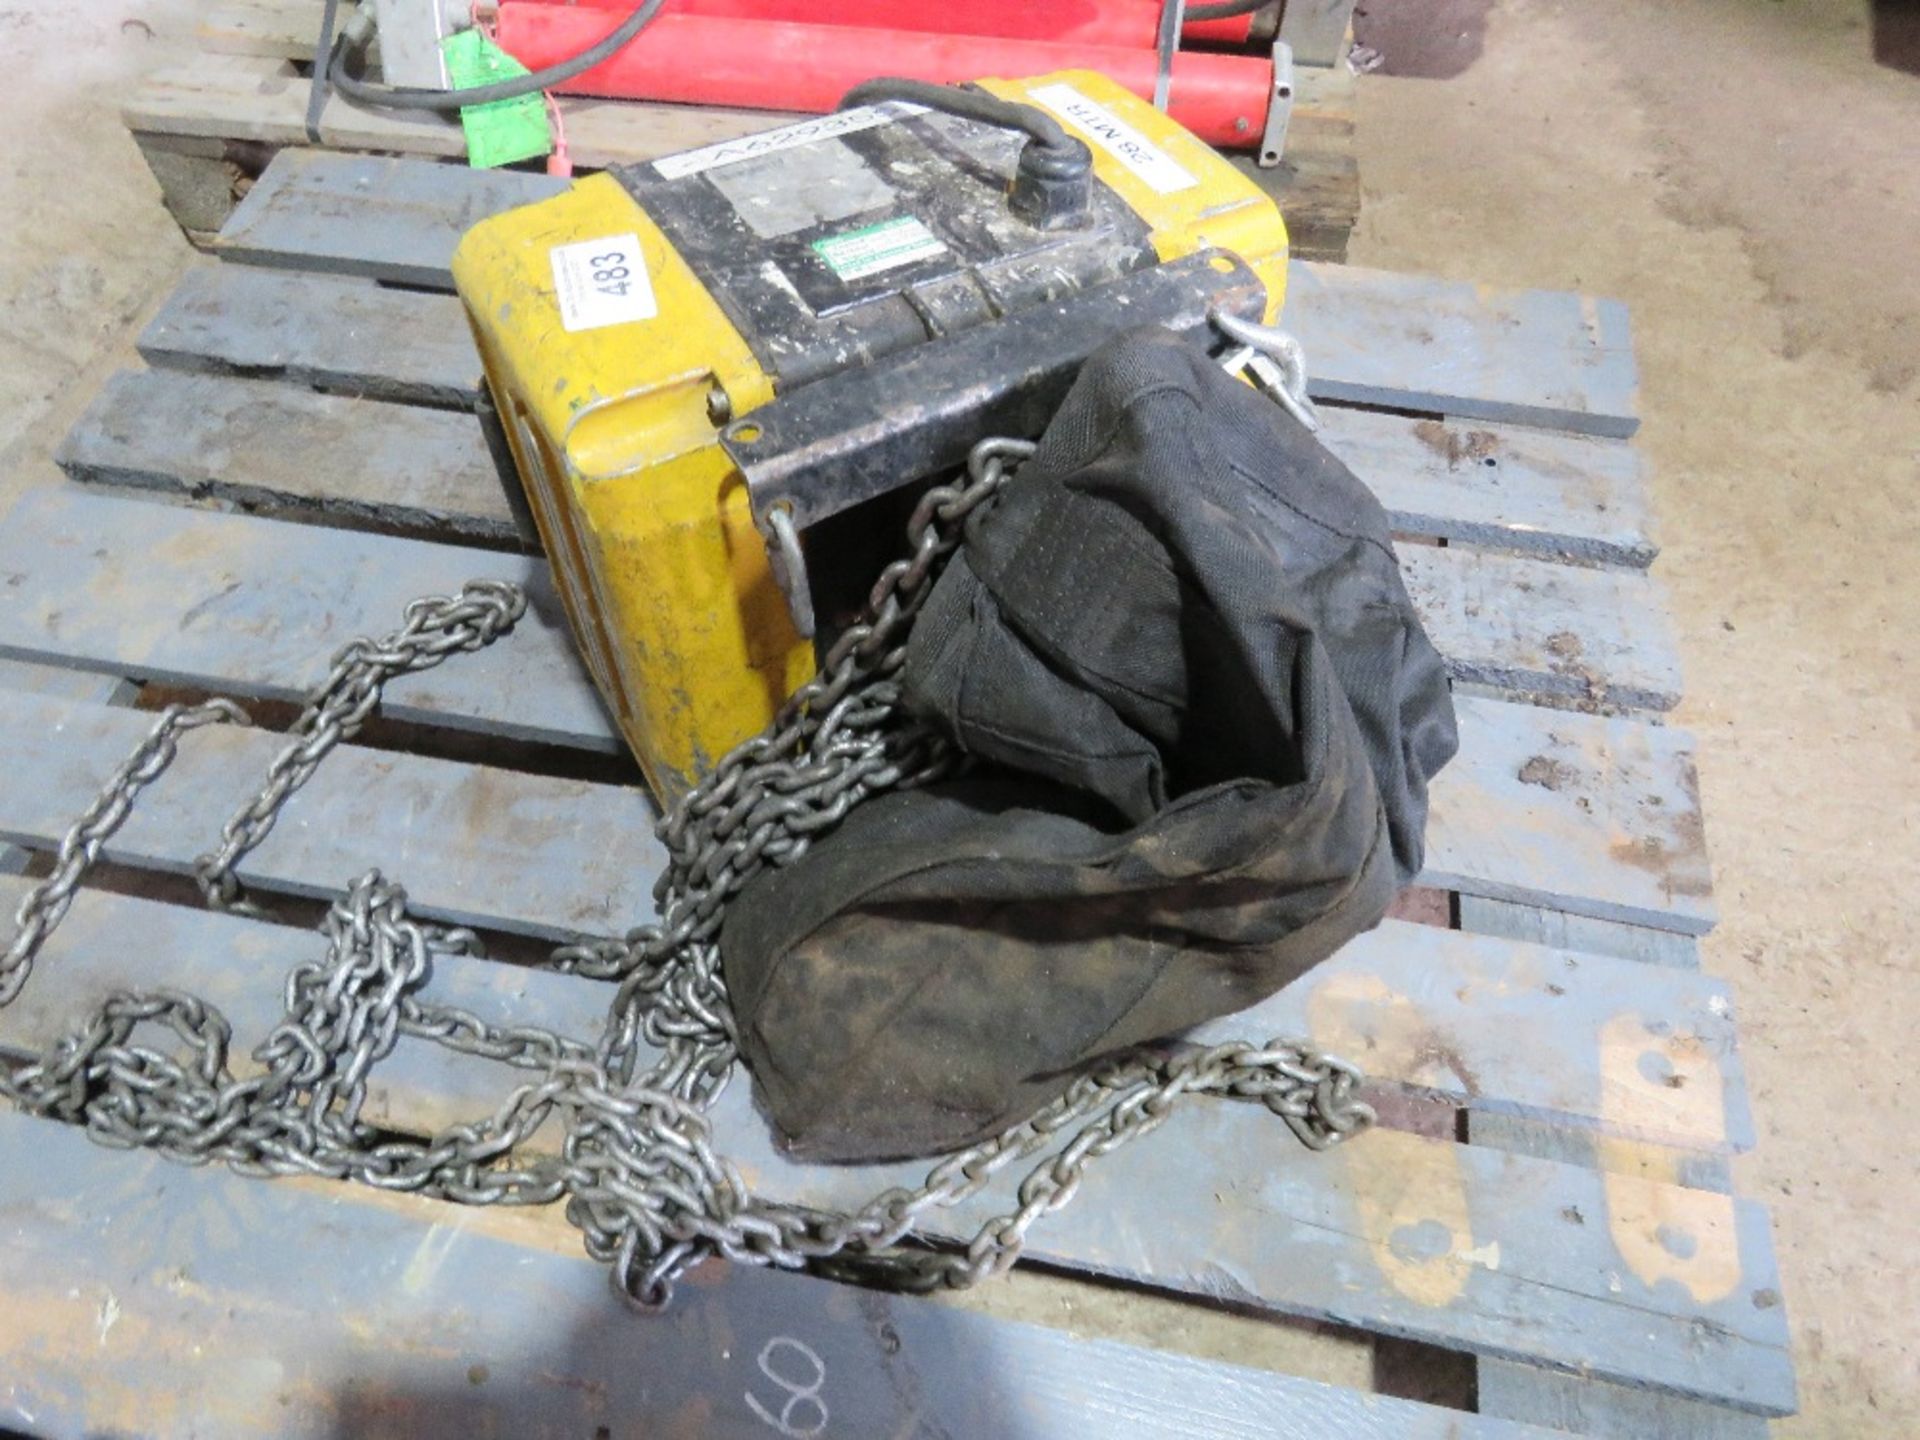 GIS 1000KG RATED CHAIN HOIST, 28 METRE LENGTH. - Image 4 of 4